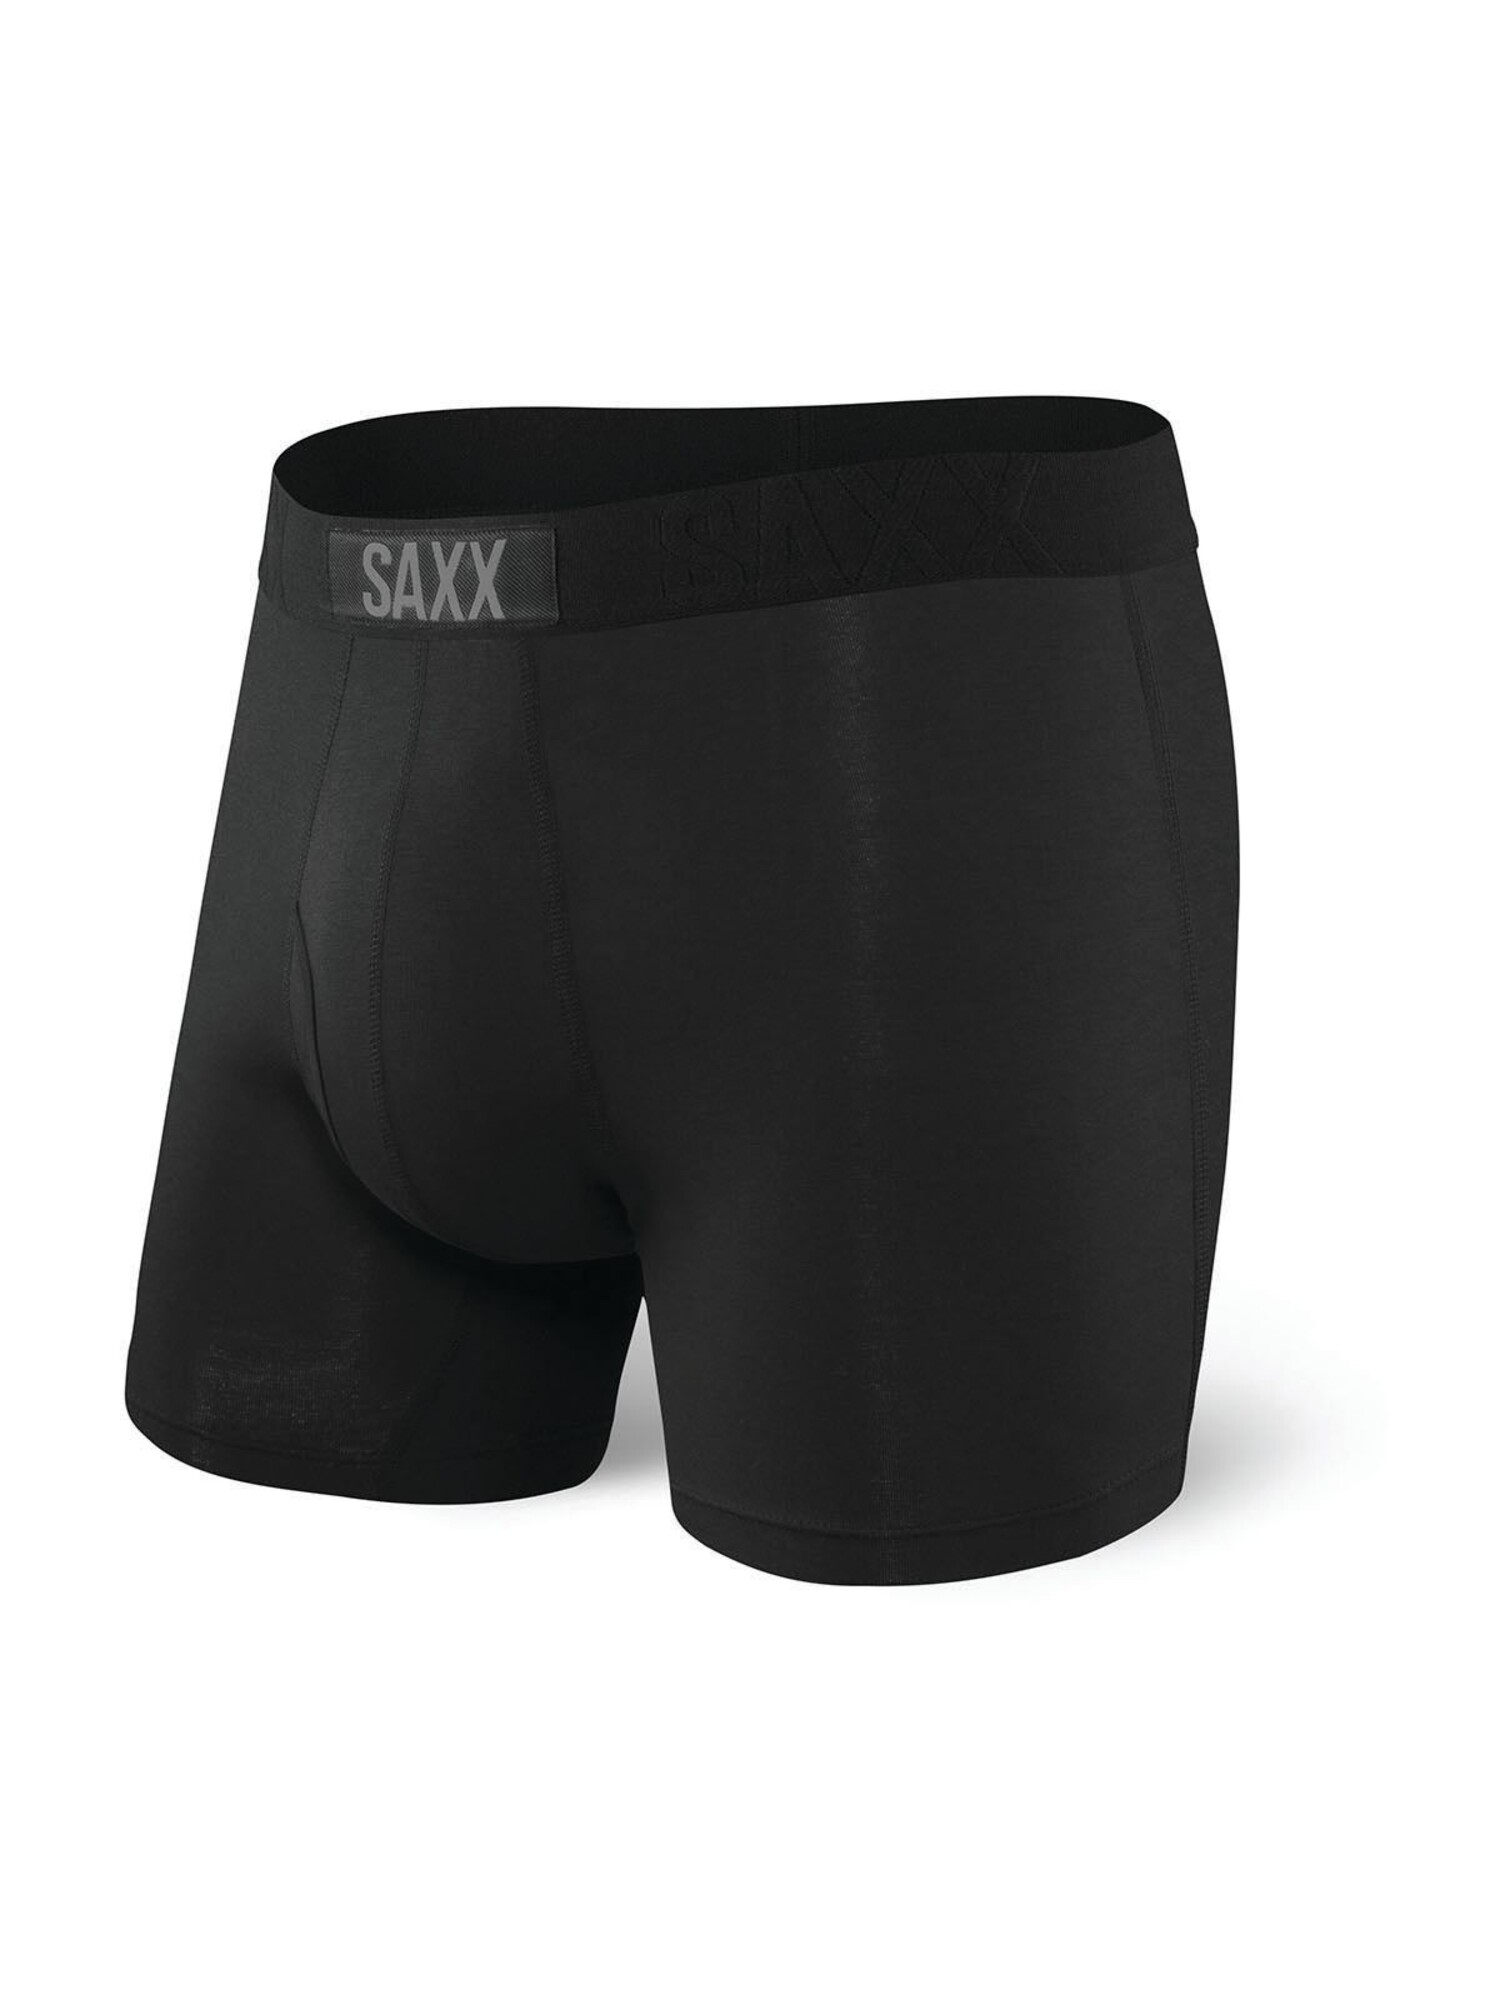 Ultra Boxer Brief SXBB30F Summer Transport - Bel Air (SBA) - Lace